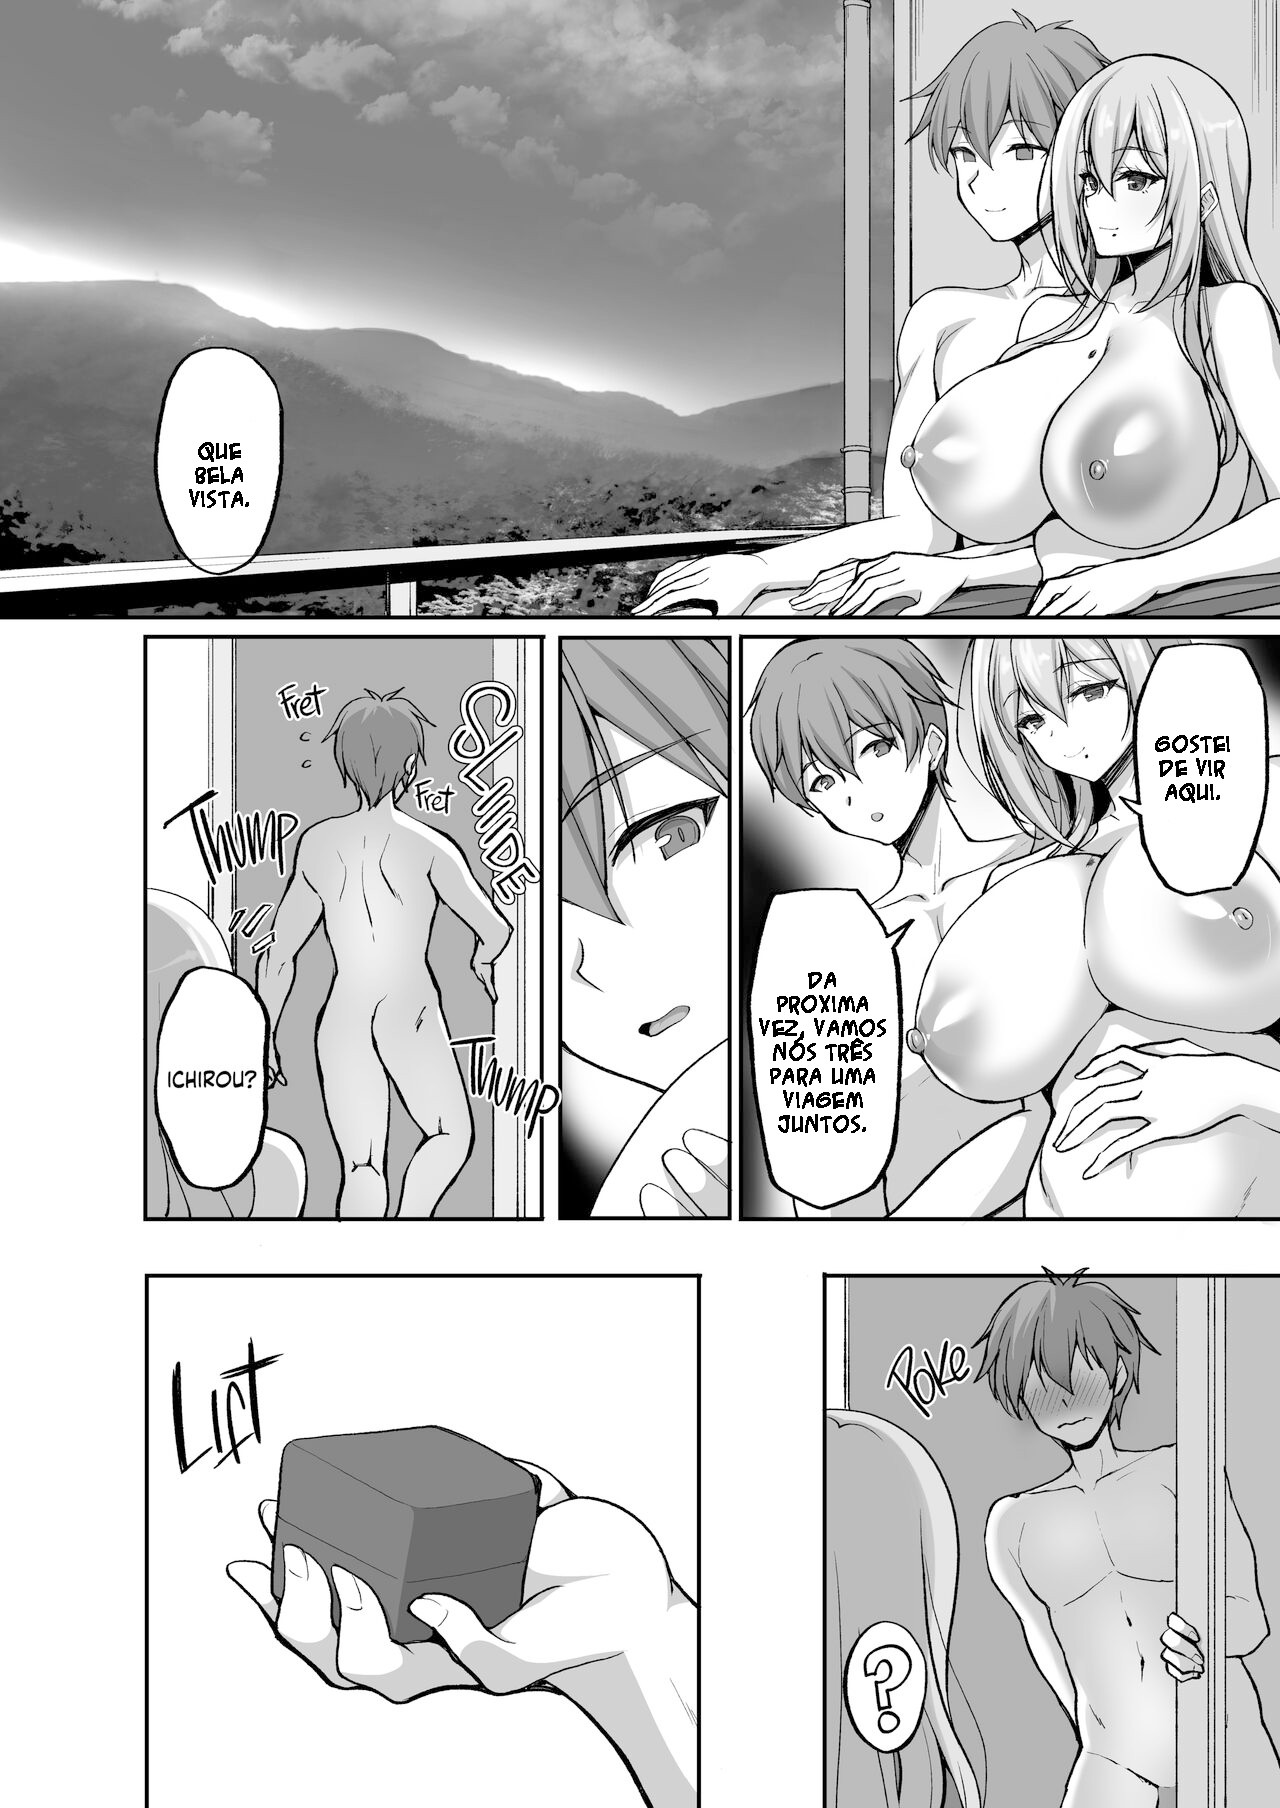 Do You Like Naughty Older Girls? Part 5: Steamy Hot Springs Trip With The Girl Next Door Hentai pt-br 53